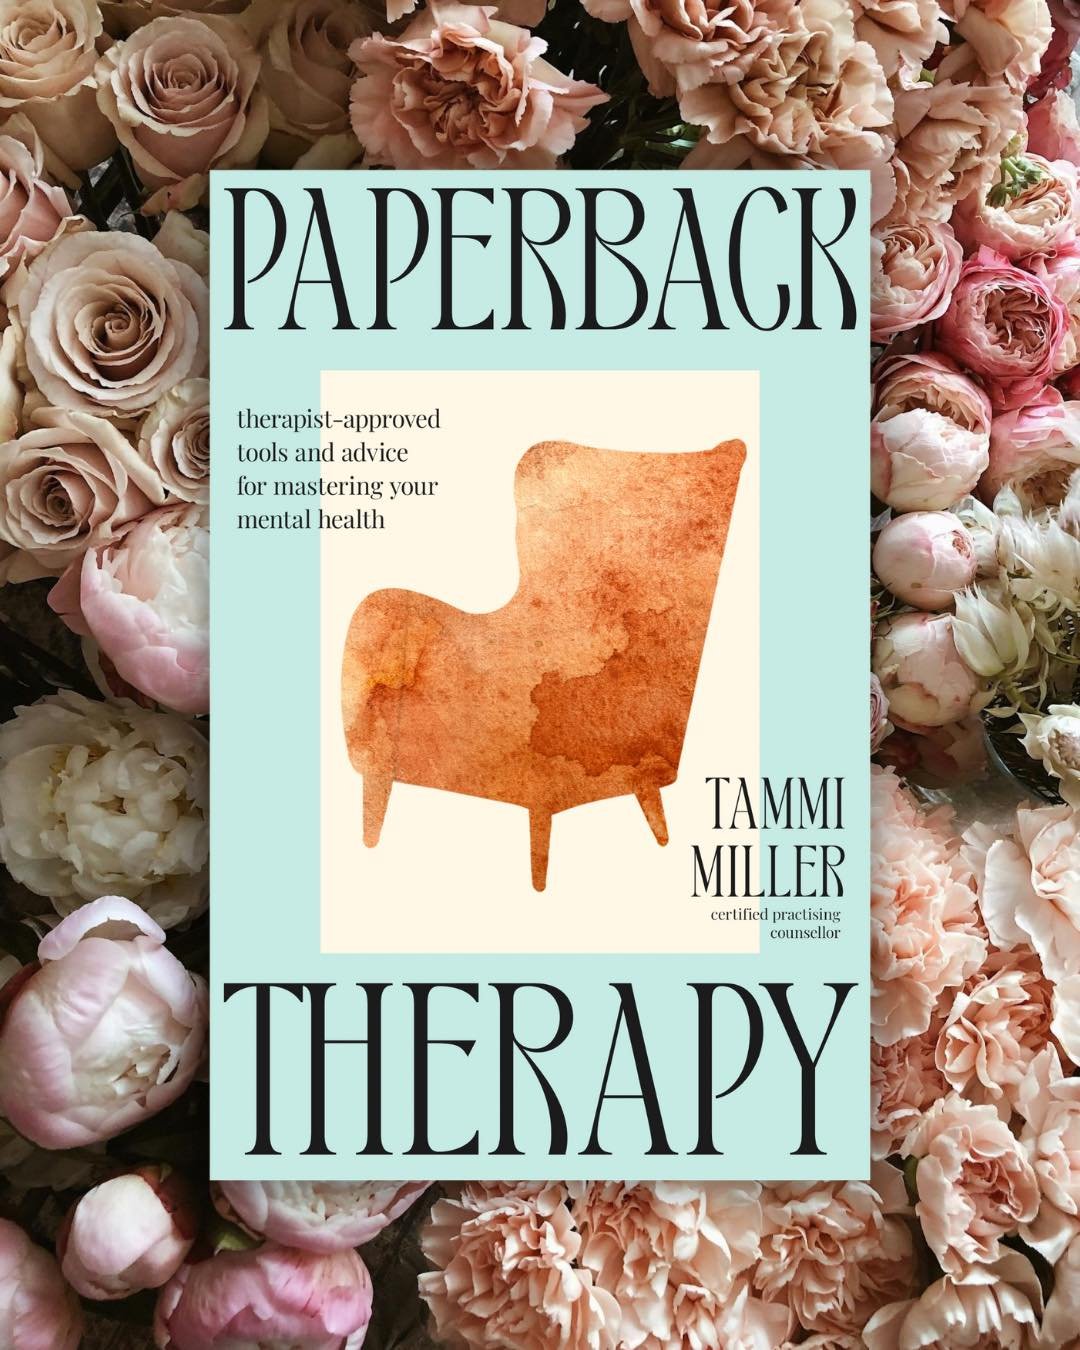 How do you gift a therapy book to the Mum in your life this Mother&rsquo;s Day (12th May)? 💐👉🏽

Here are some easy tips for hinting to Mum that they may get something out of the therapist-approved tools, advice and exercises in #PaperbackTherapy&h